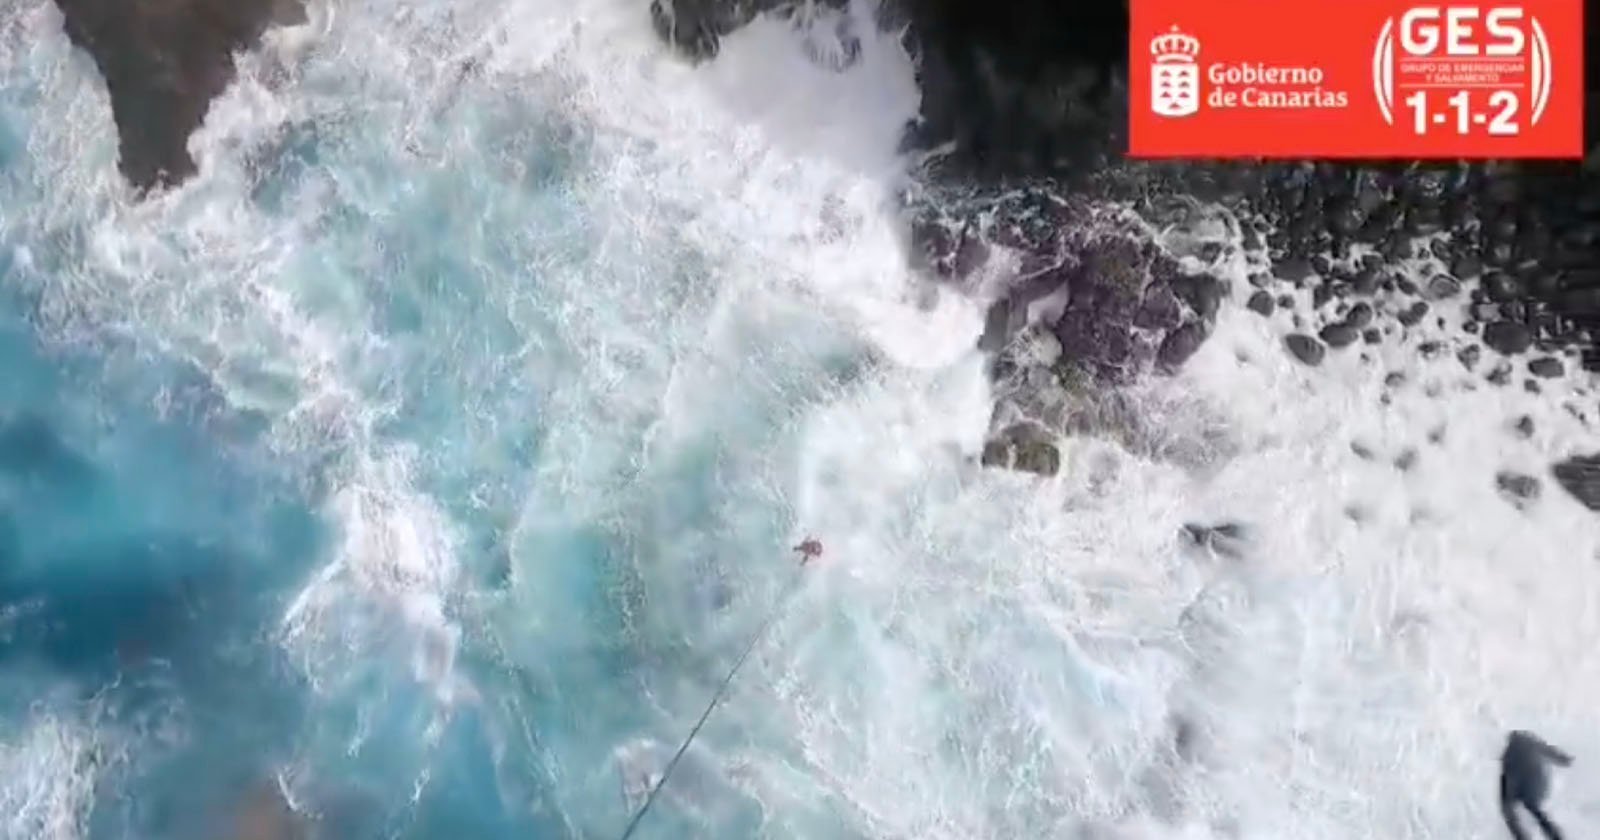 Photographer Dies After Being Swept Into the Sea While Shooting Big Waves